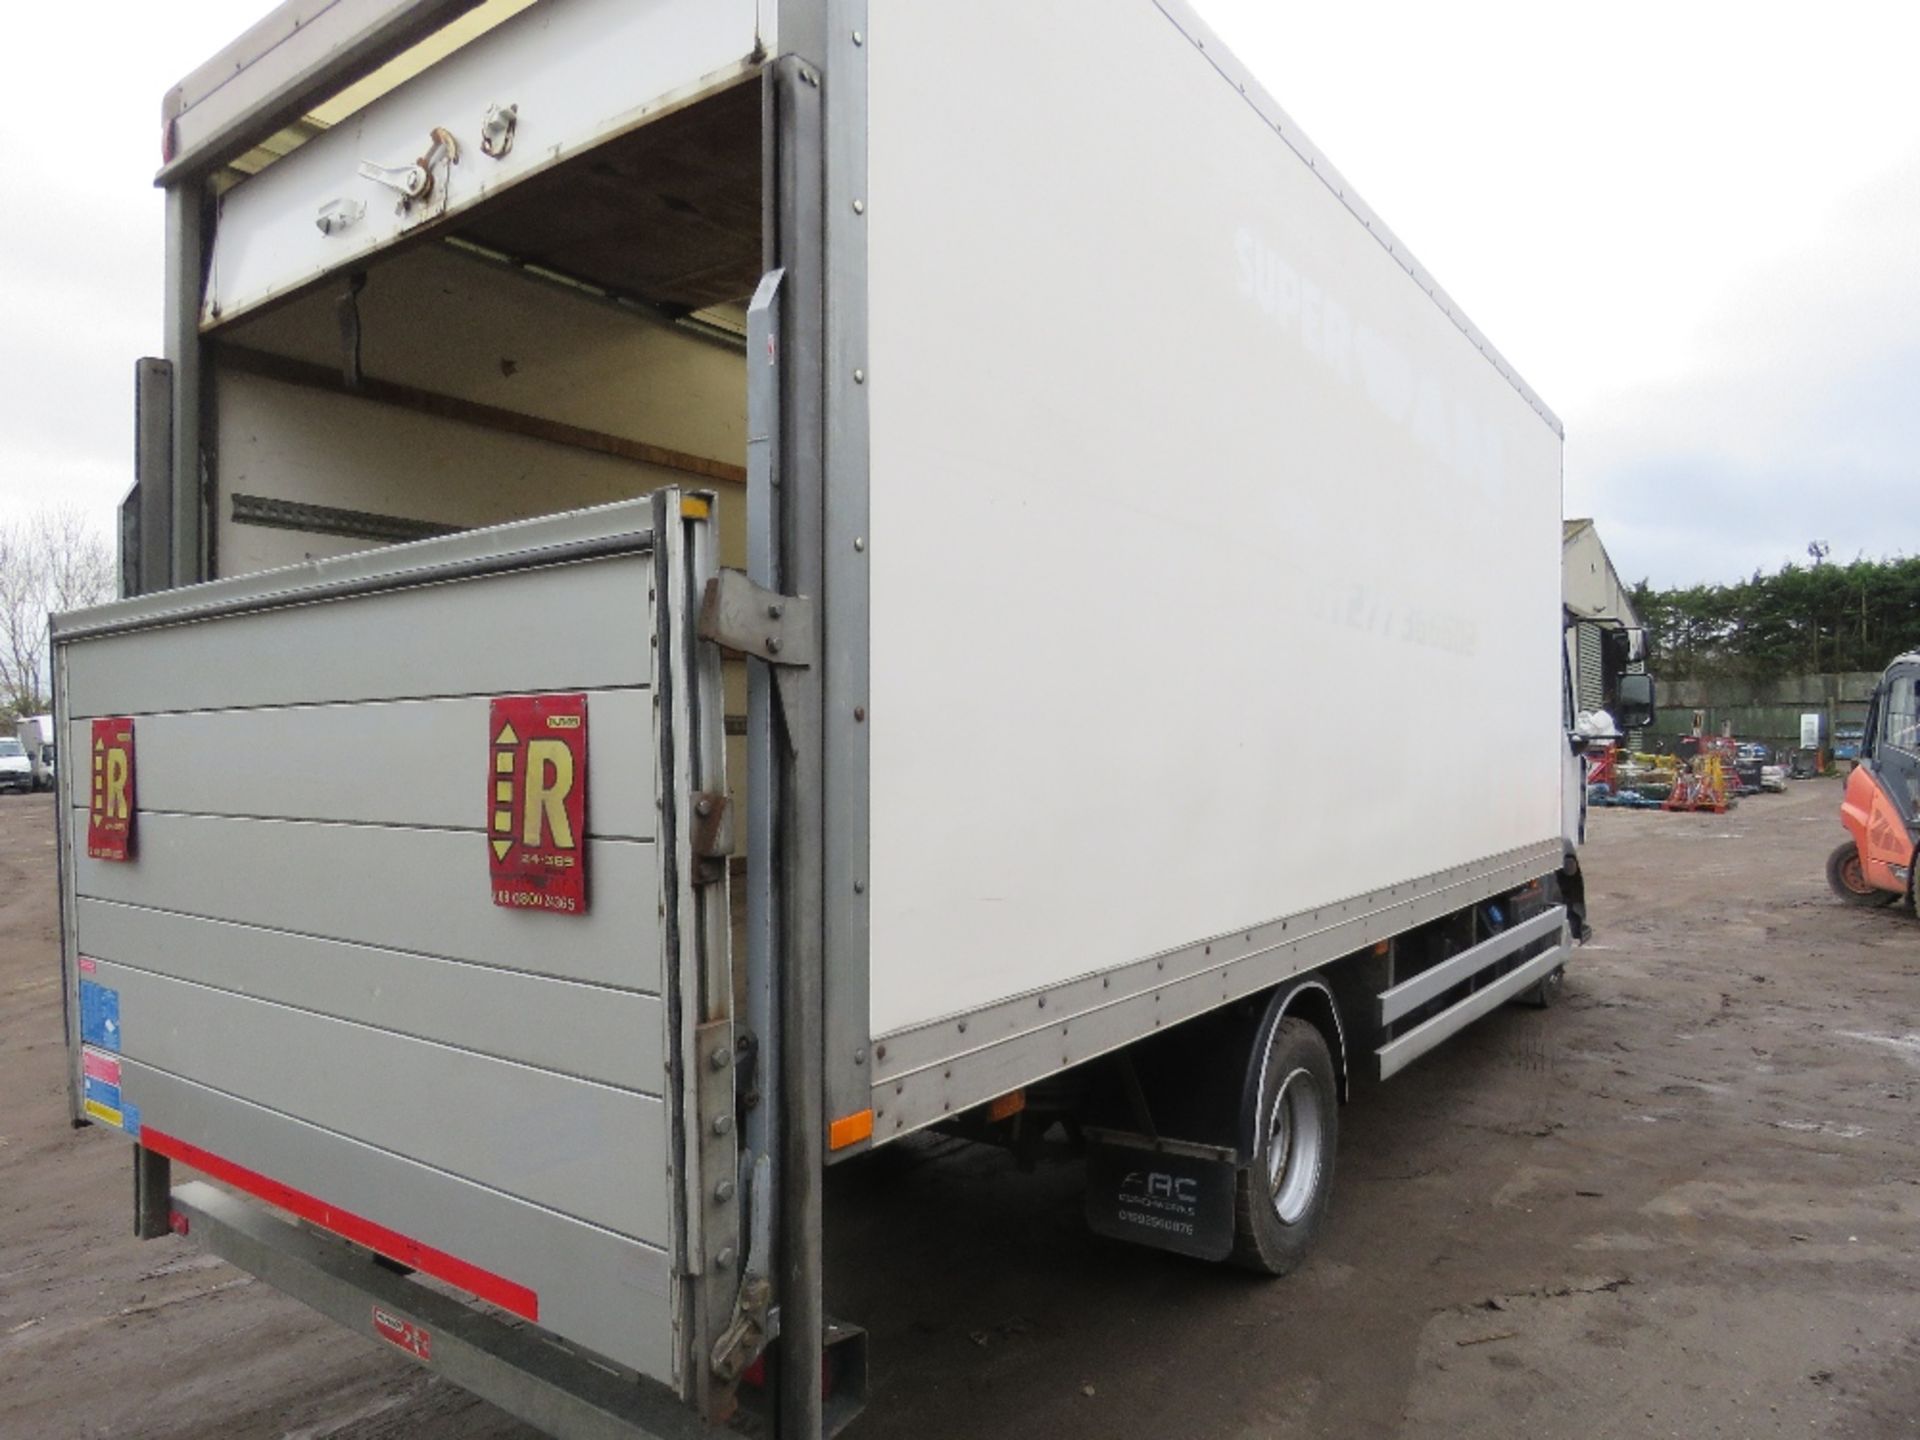 RENAULT D75 BOX LORRY REG:KE19 VVN. 7500KG RATED, DIRECT FROM LOCAL COMPANY WHO ARE SELLING DUE TO A - Image 9 of 16